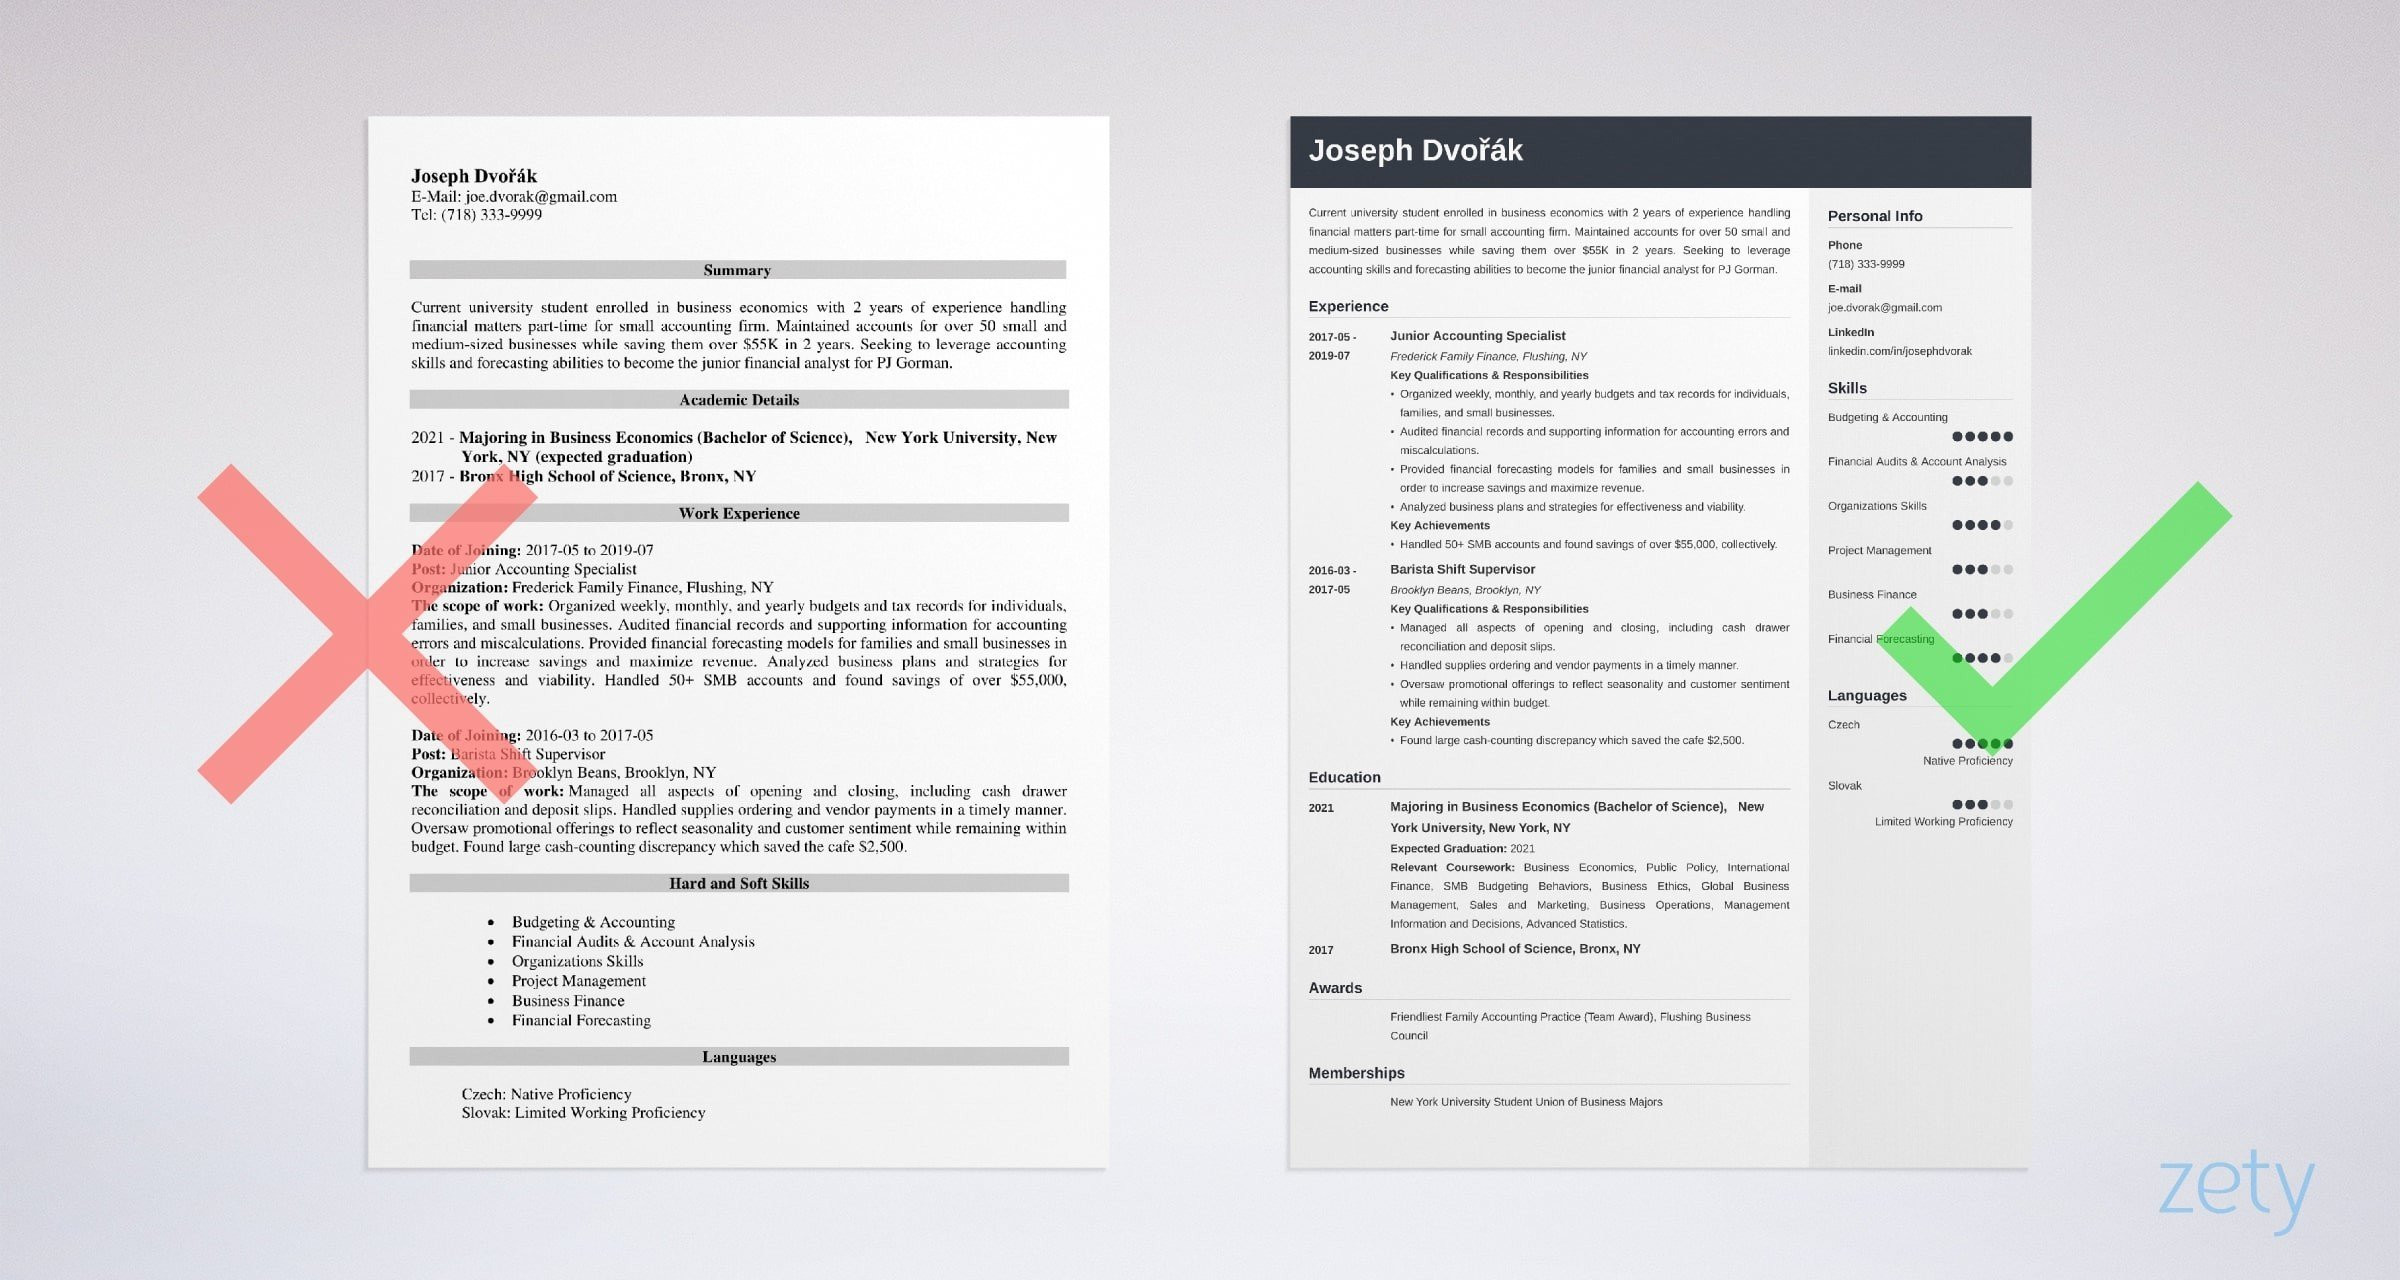 Sample Resume while Still In College Undergraduate College Student Resume Template & Guide